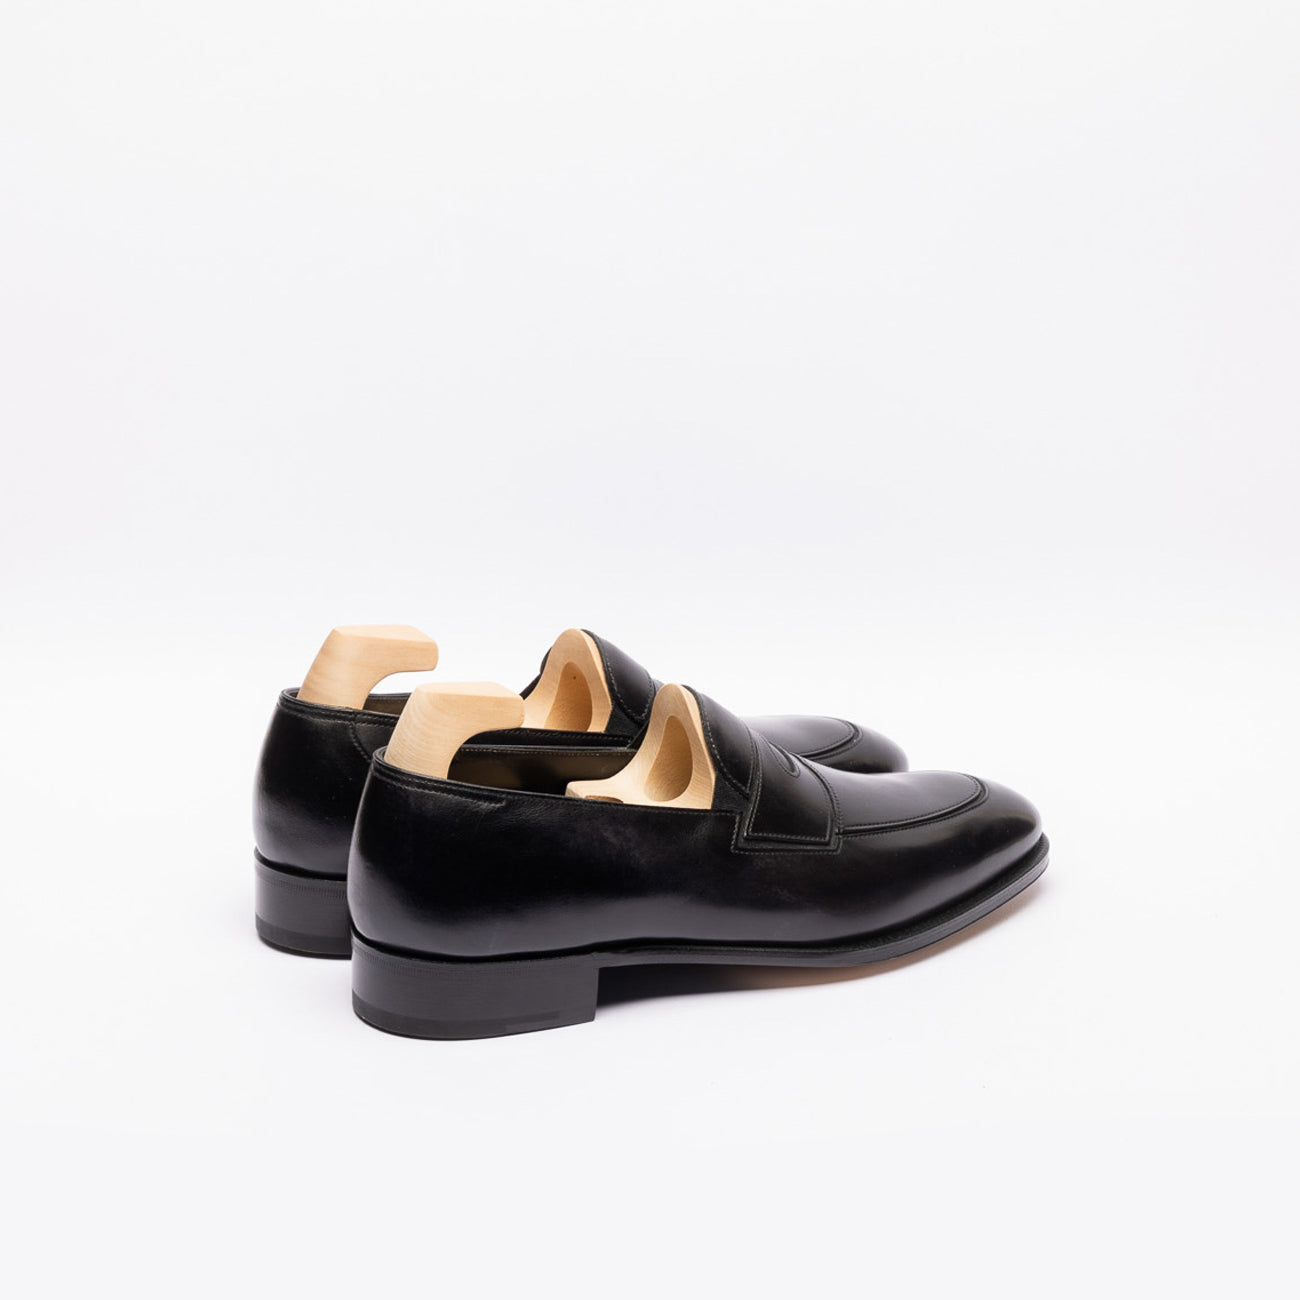 John Lobb Montgomery penny loafer in black leather